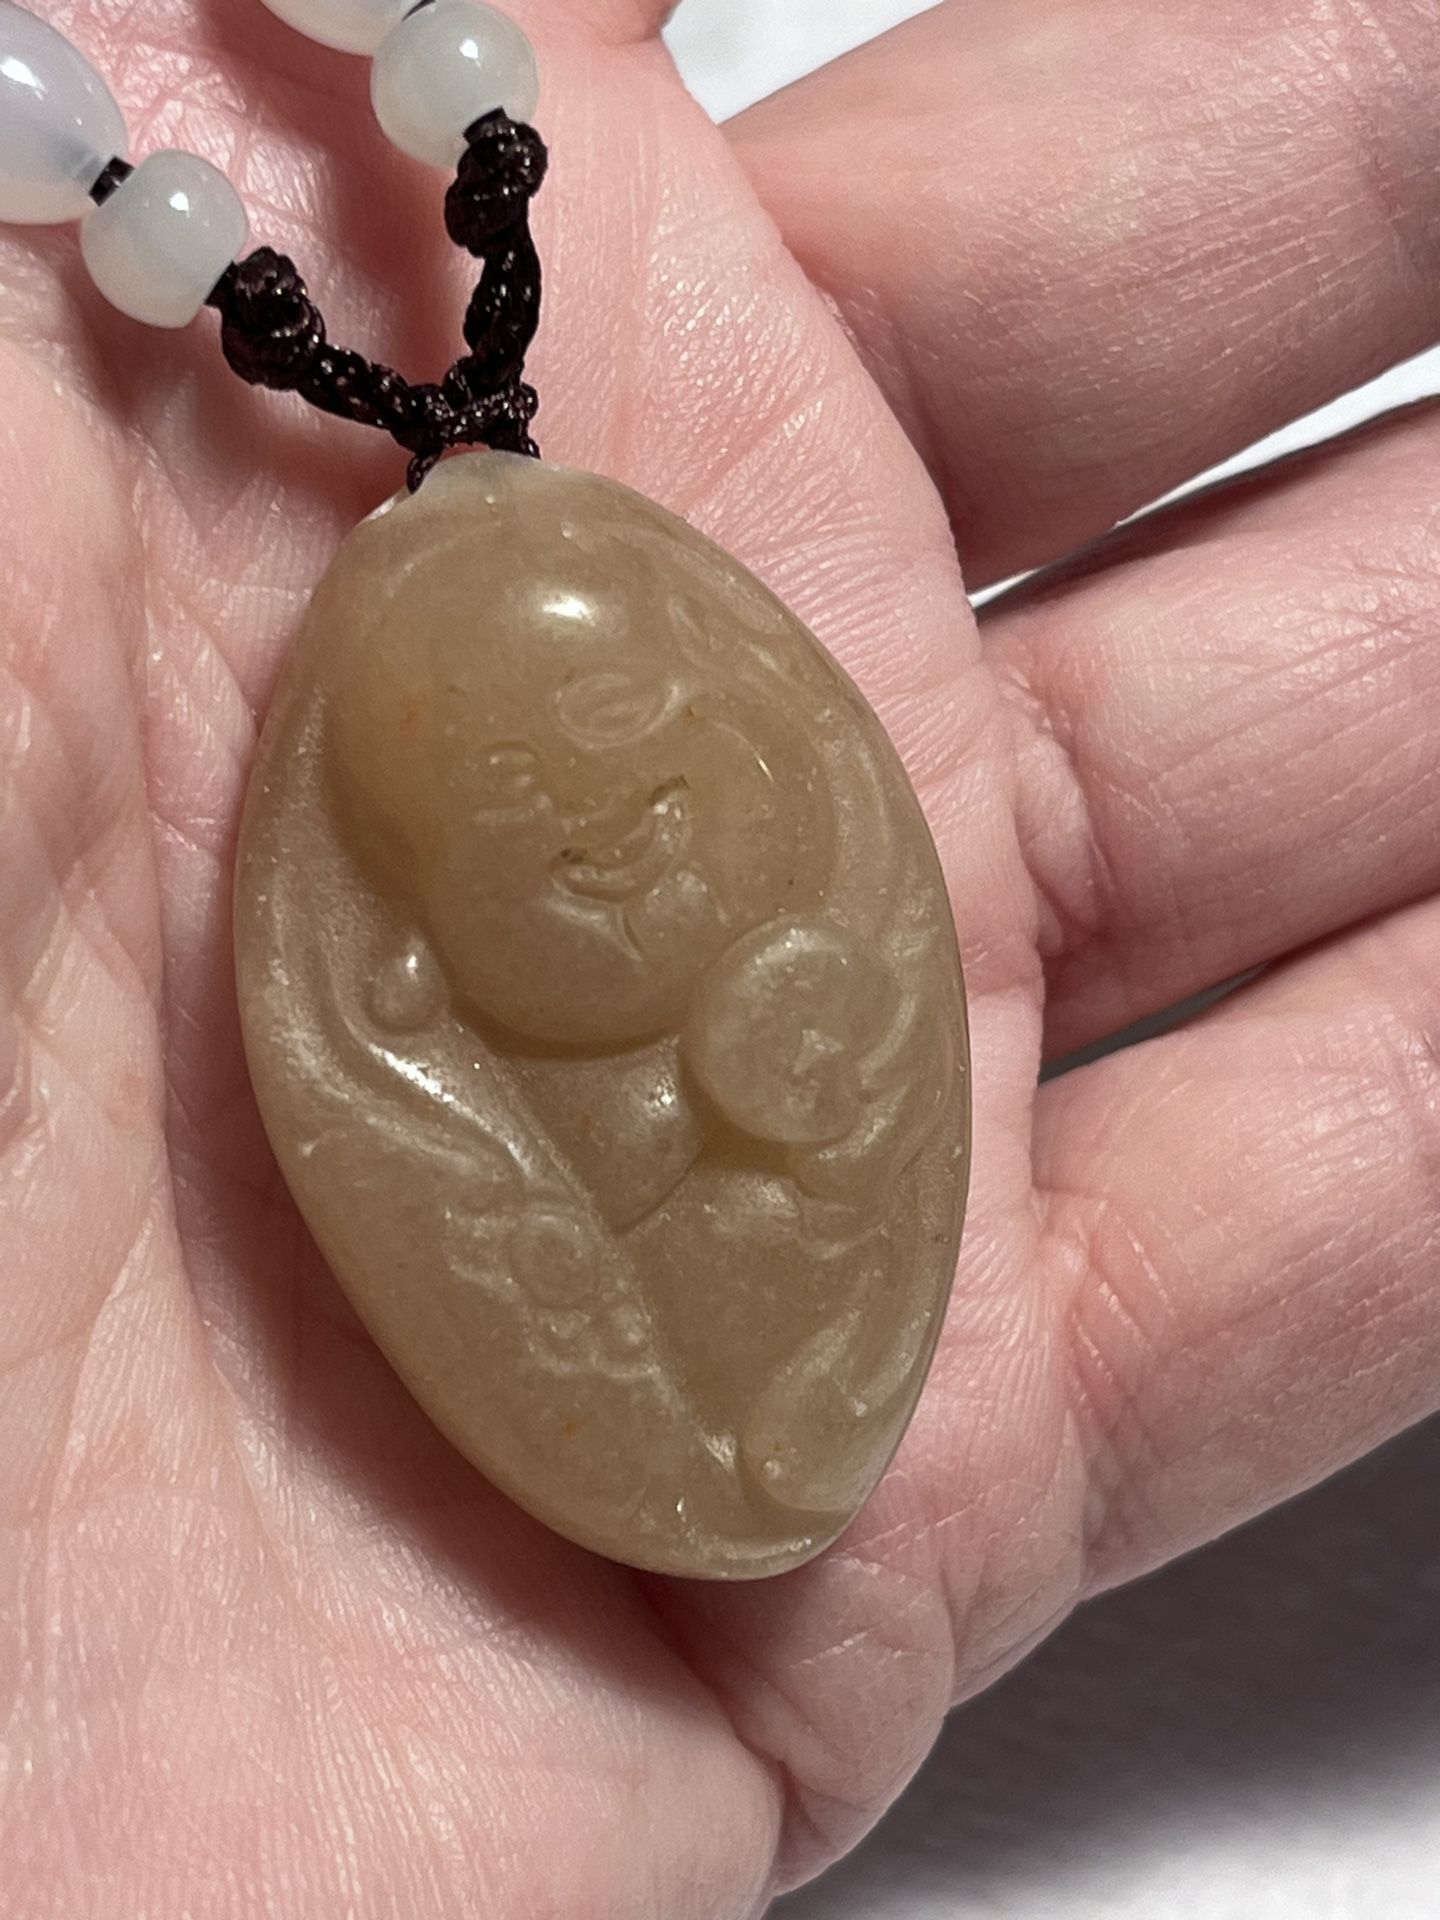 BUDDHA HAND CARVED PENDANT Adjustable Cord NECKLACE Quartzite Carving 1537